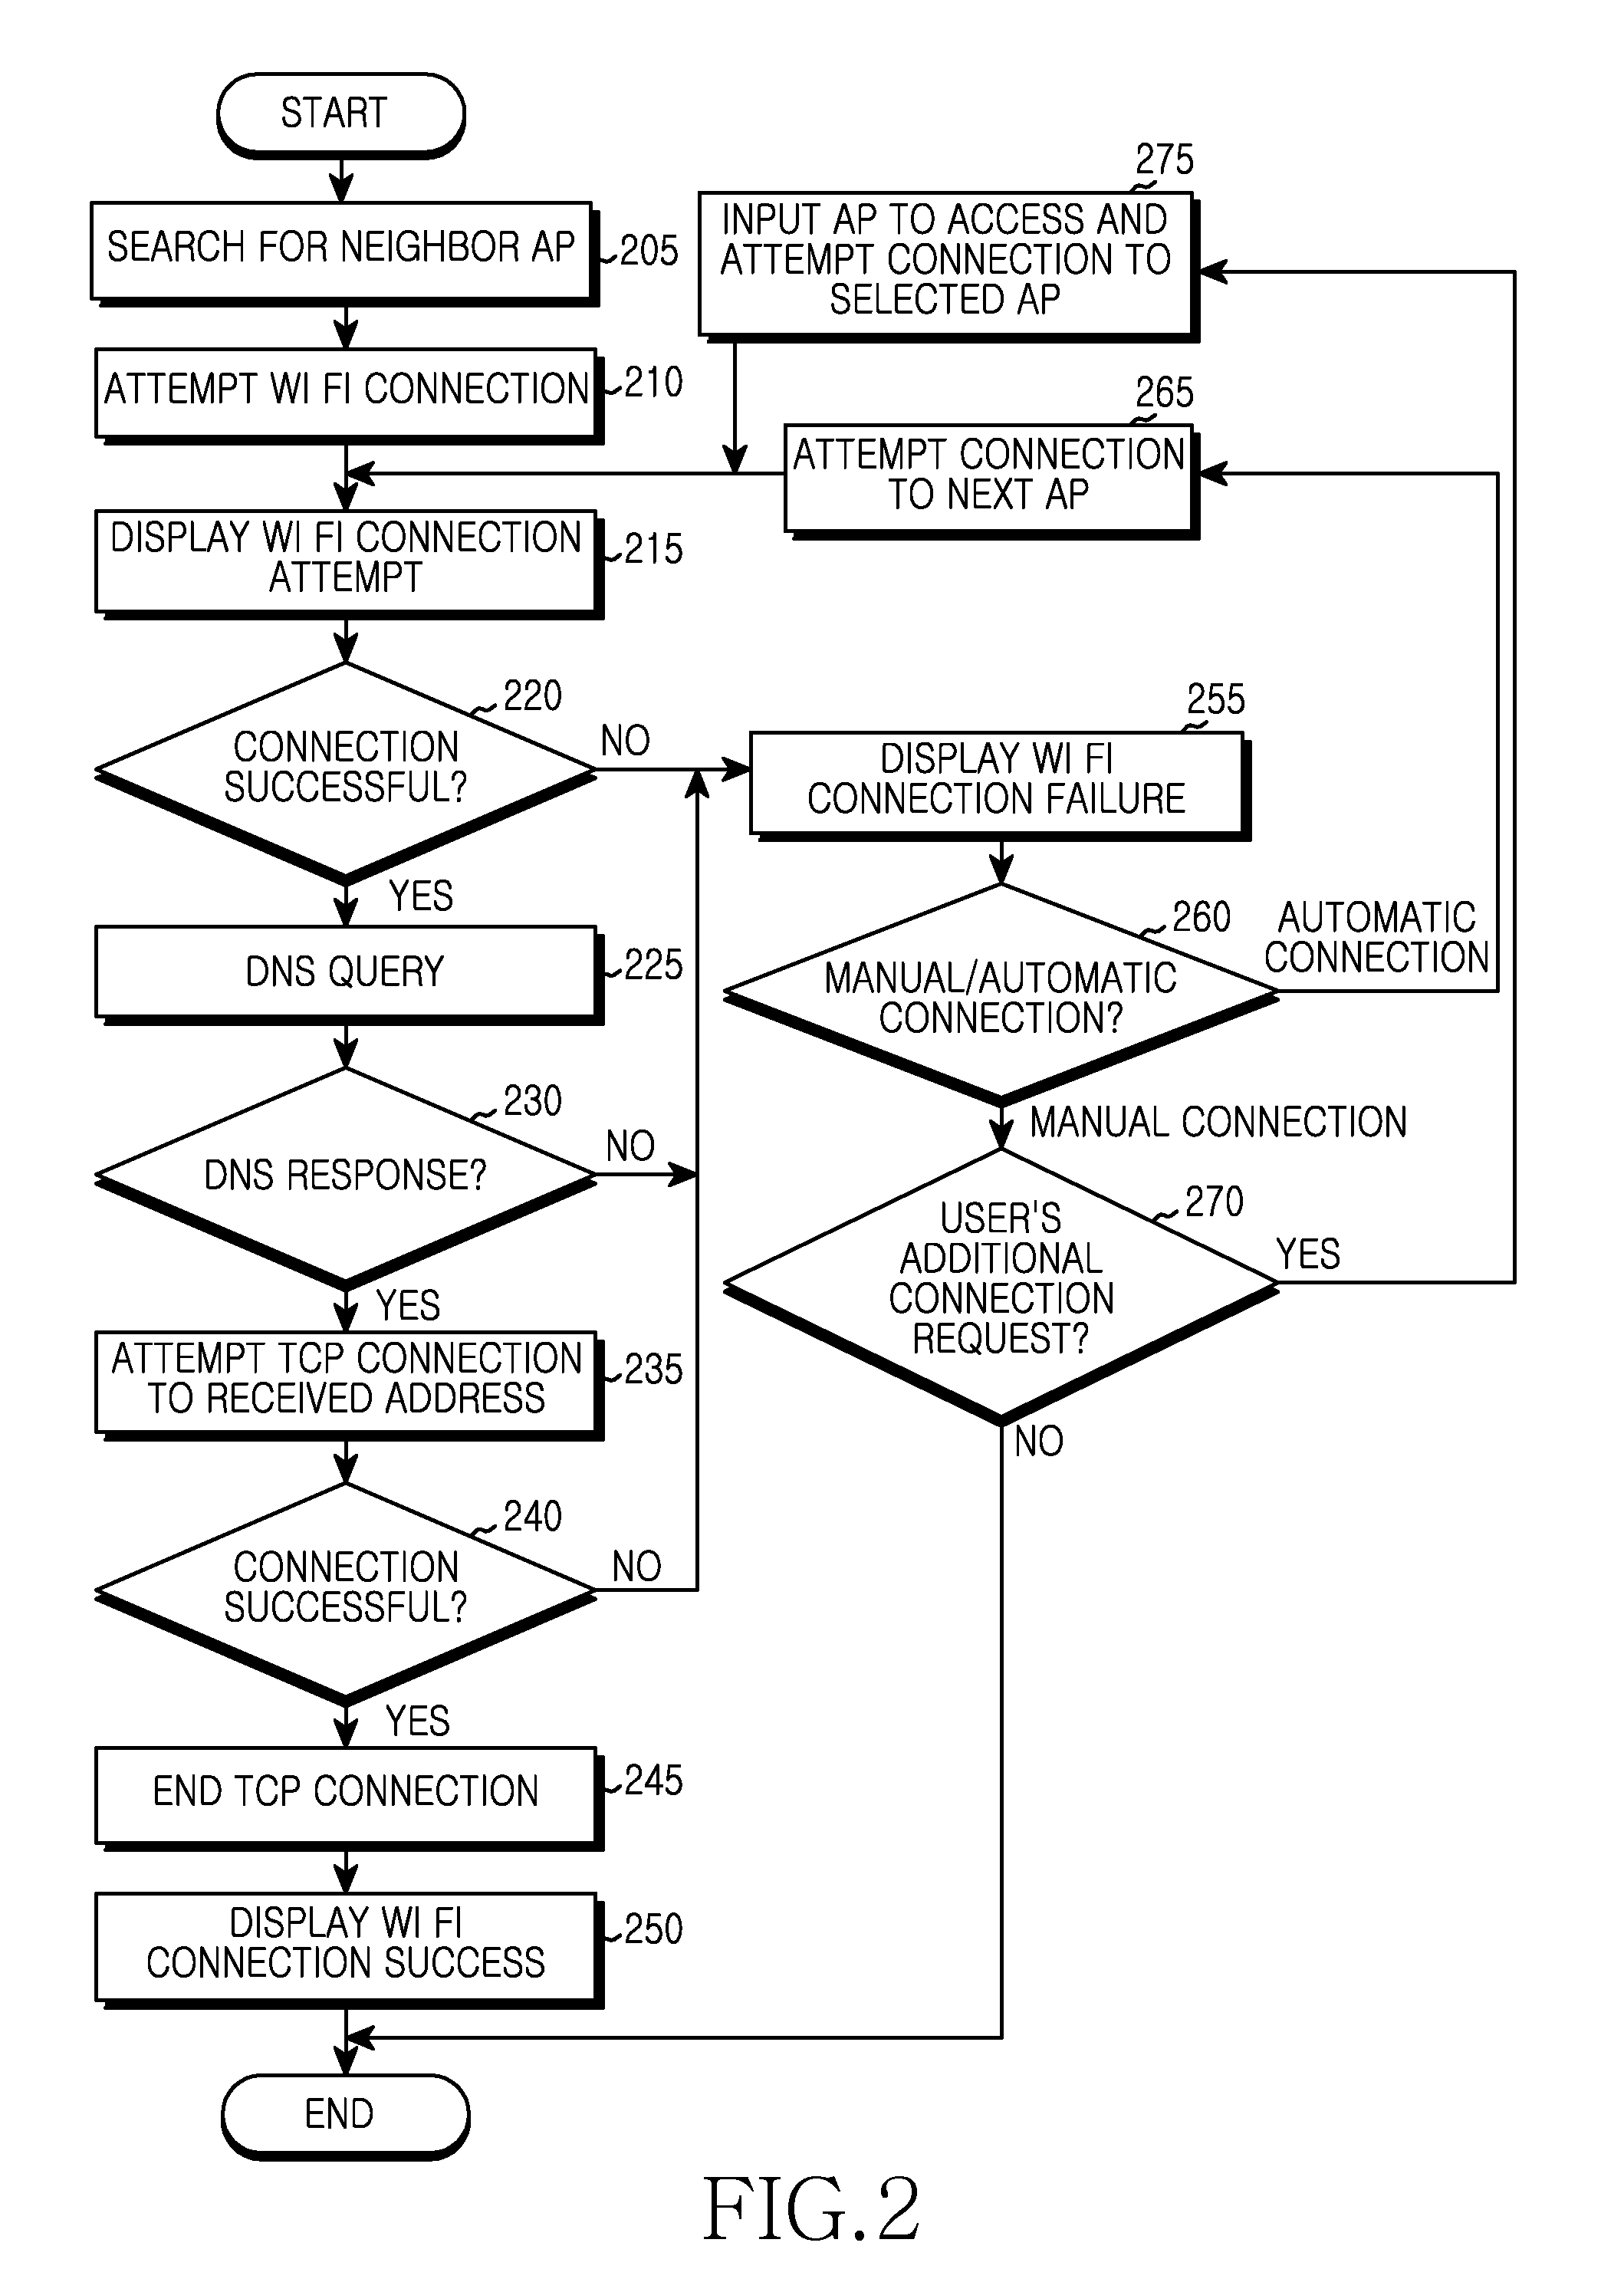 Apparatus and method for determining validity of WiFi connection in wireless communication system